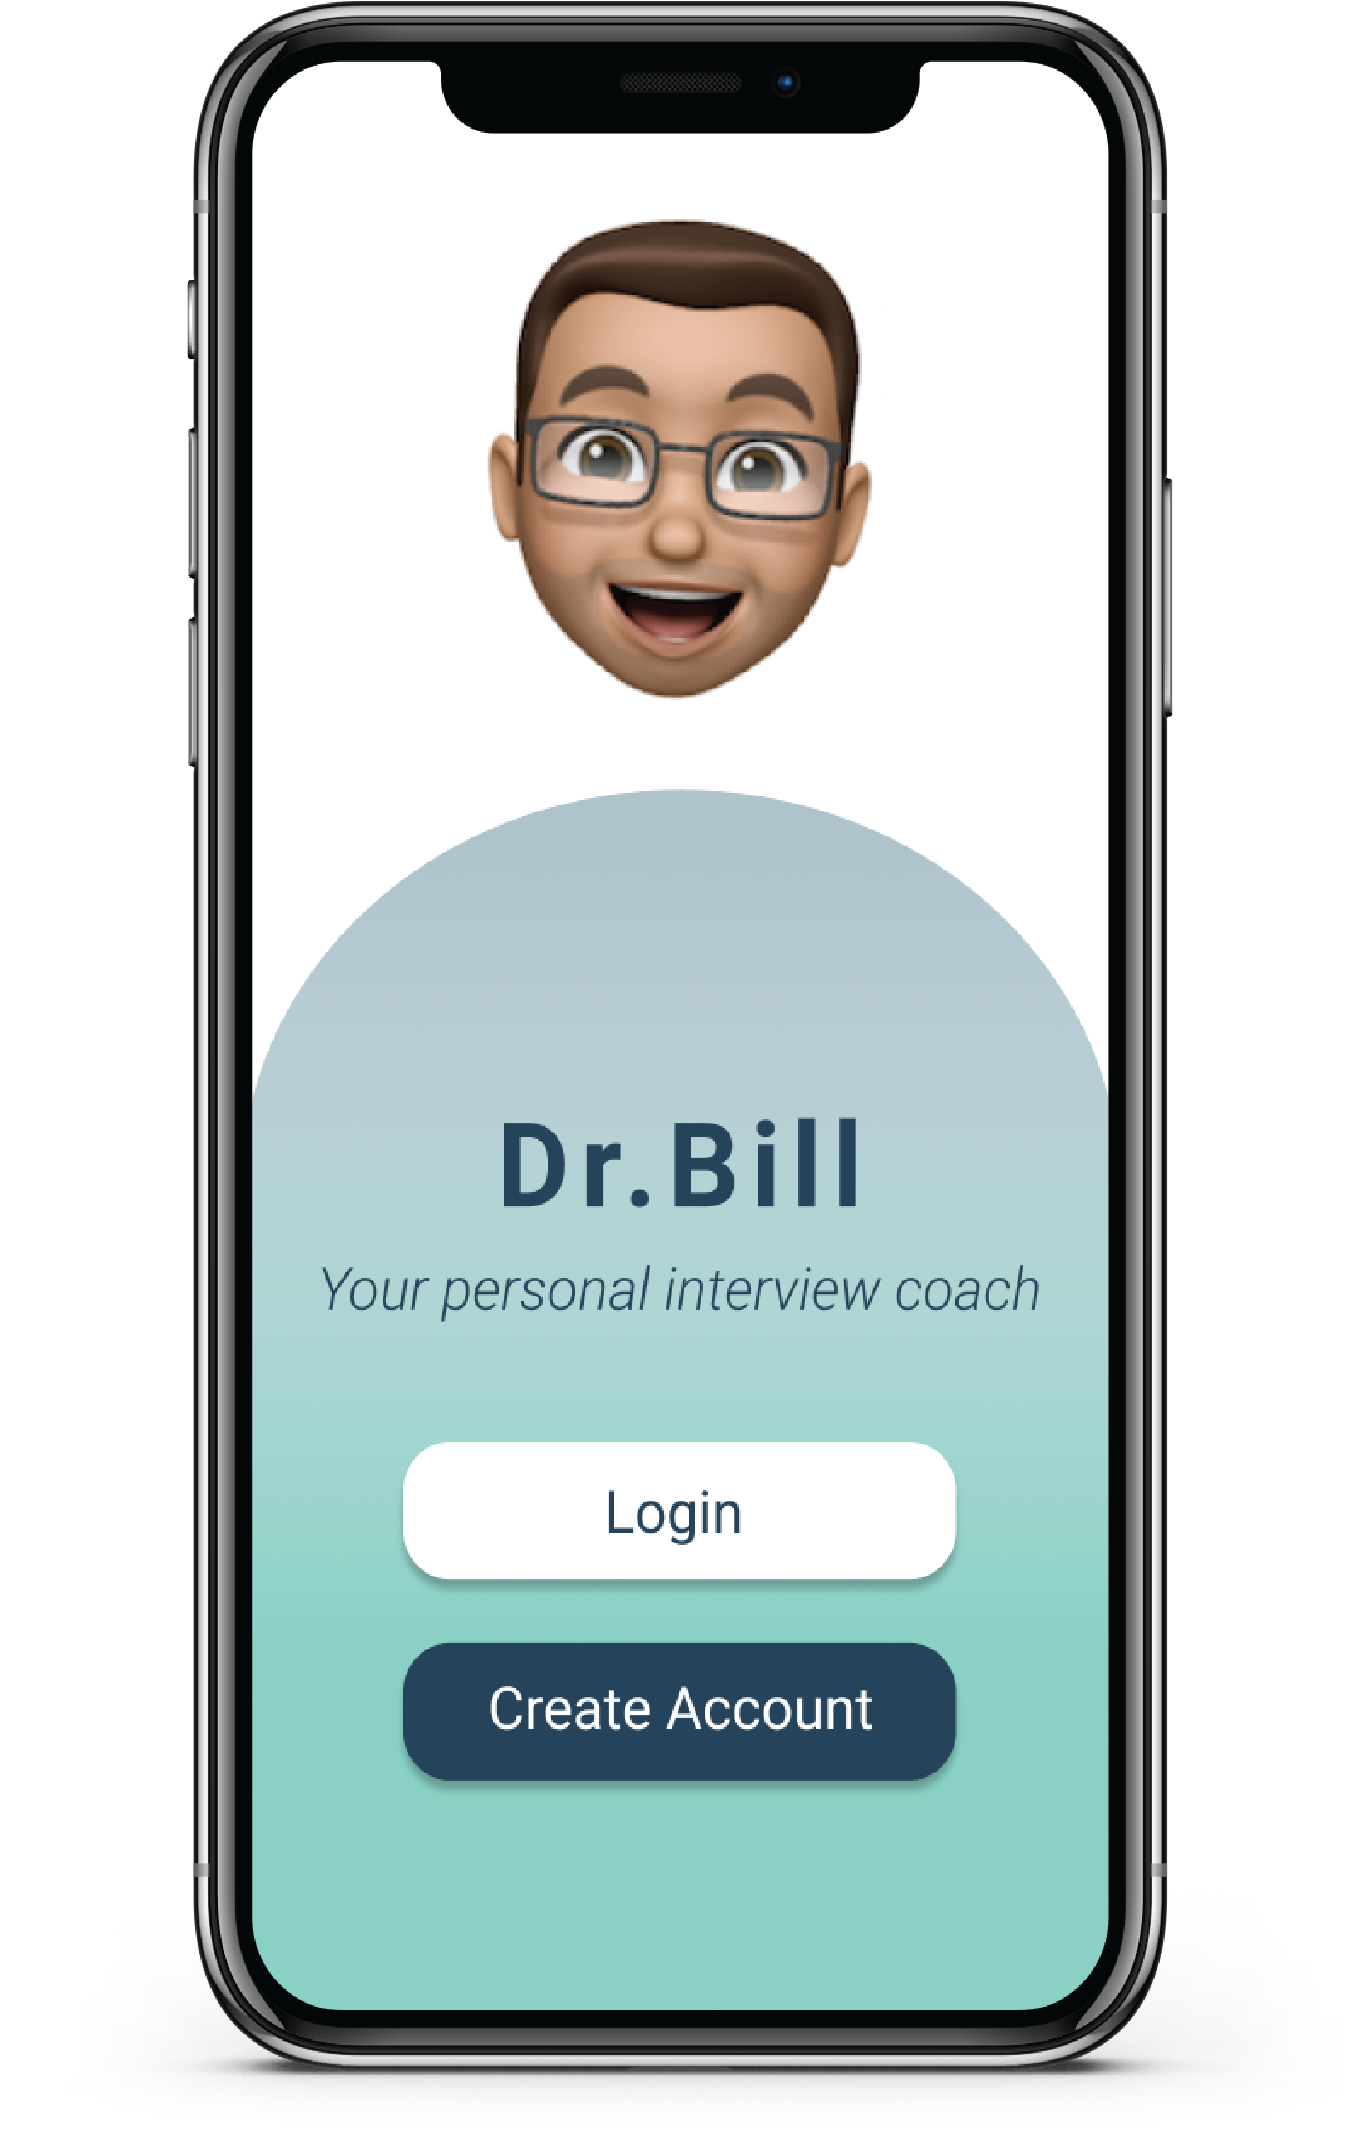 Log In screen for Dr. Bill, prototyped with Figma